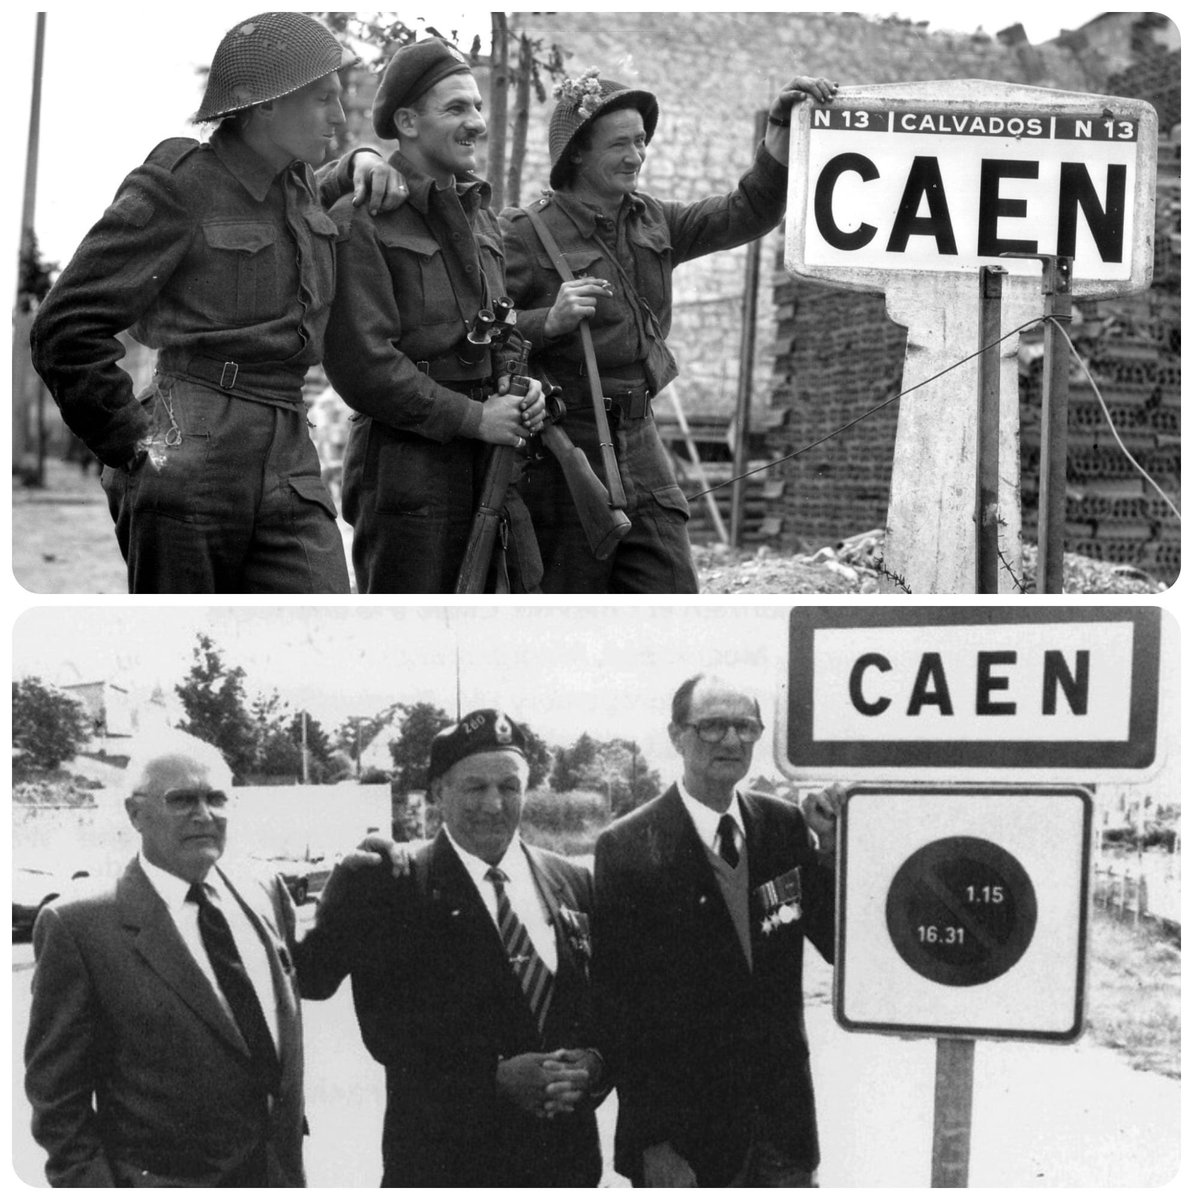 Just seen this wonderful ‘Then & Now’ photo on a FB site. Taken in July 1944 it shows three soldiers from Queen’s Own Rifles of Canada (Bernard Hoo, John McCouville, Roy Kostick) at the entrance of Caen - 1944/1988 #DDay #DDay77 #History